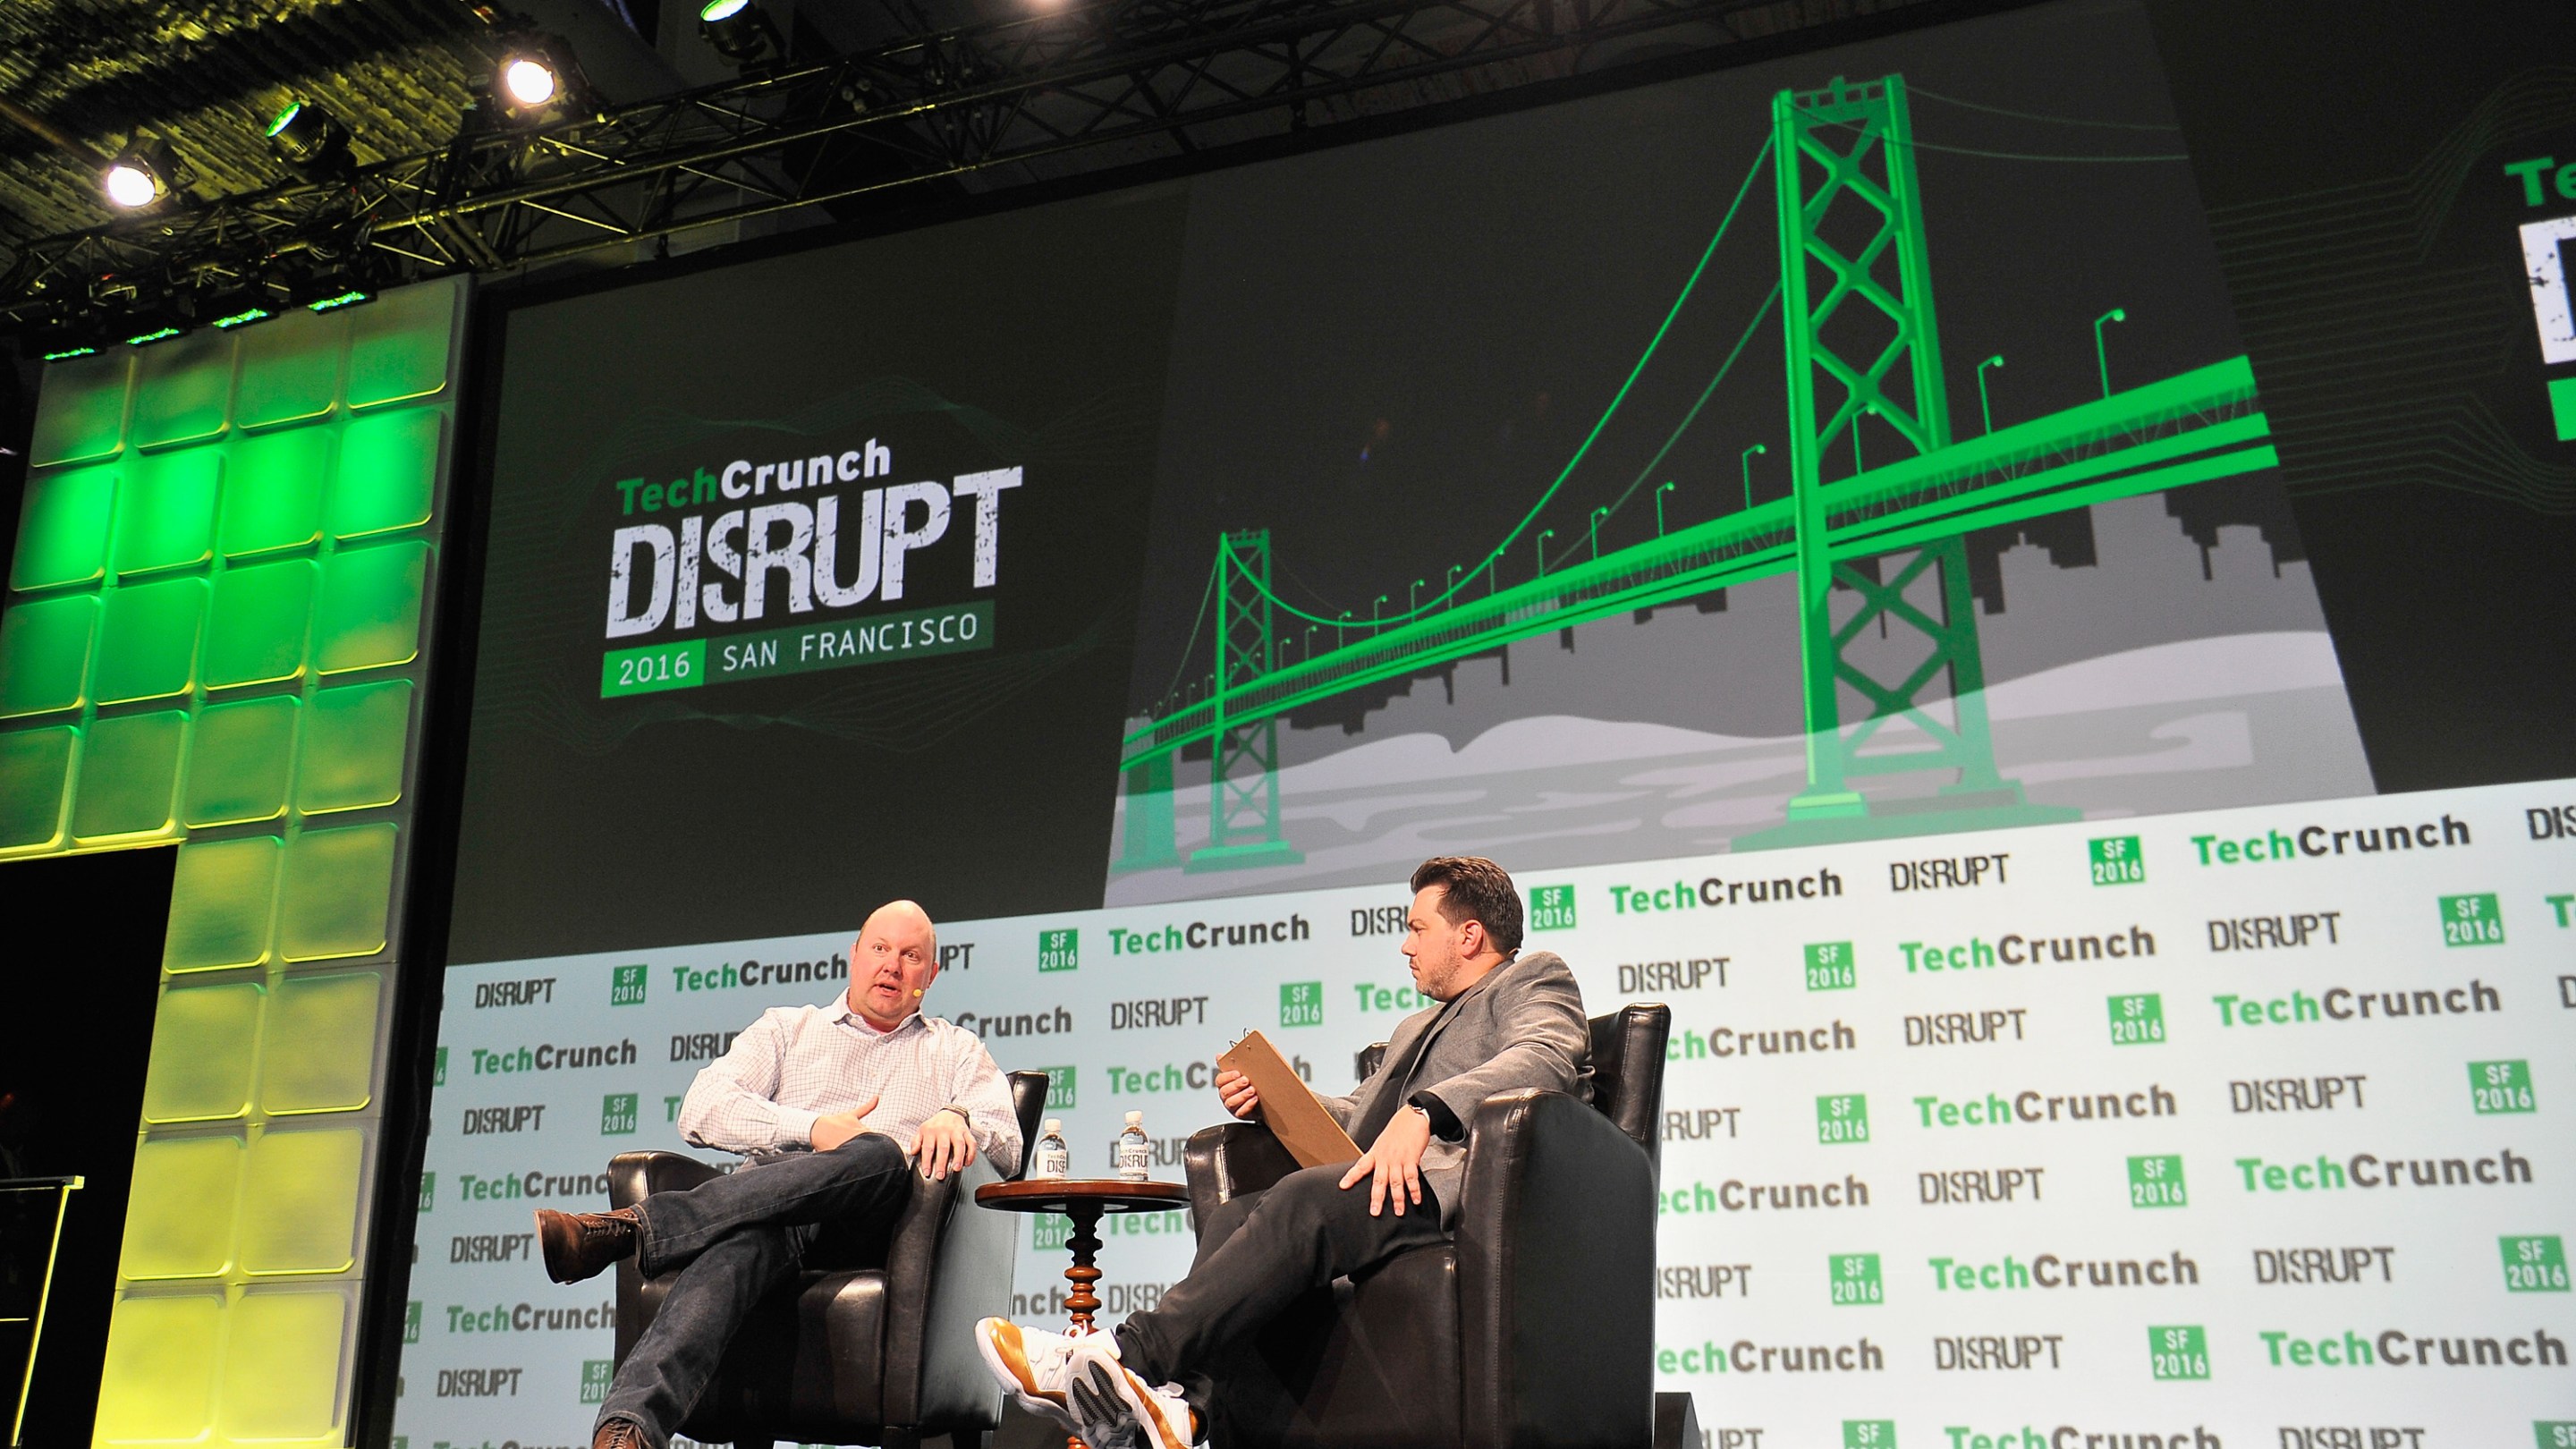 Silicon Valley entrepreneur Marc Andreessen onstage at the TechCrunch Disrupt festival in 2016.